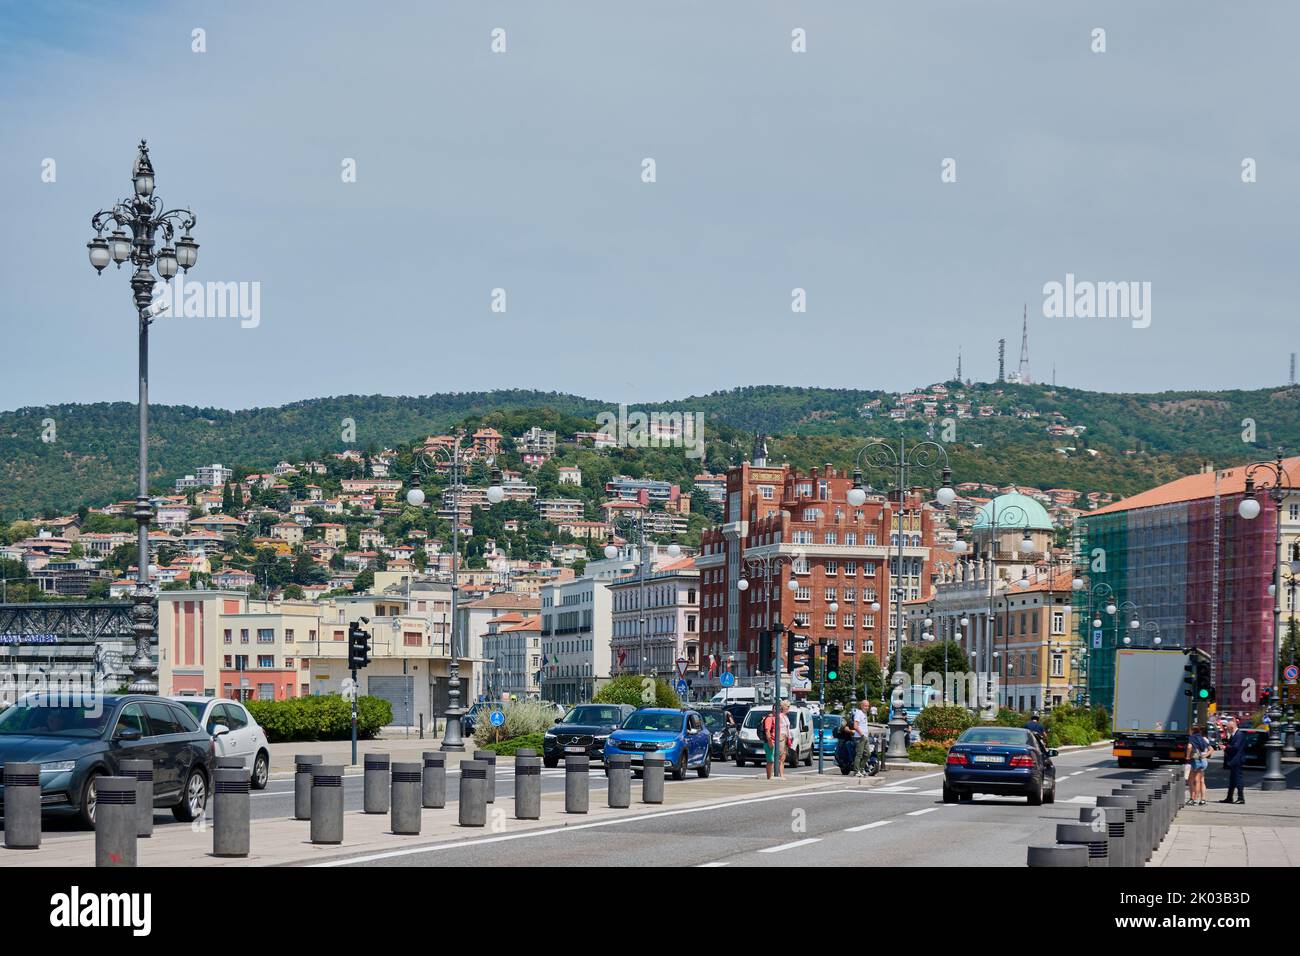 Trieste, Italy - July 26, 2022: tourists and cars in the main road near the city center of Trieste, Italy Stock Photo